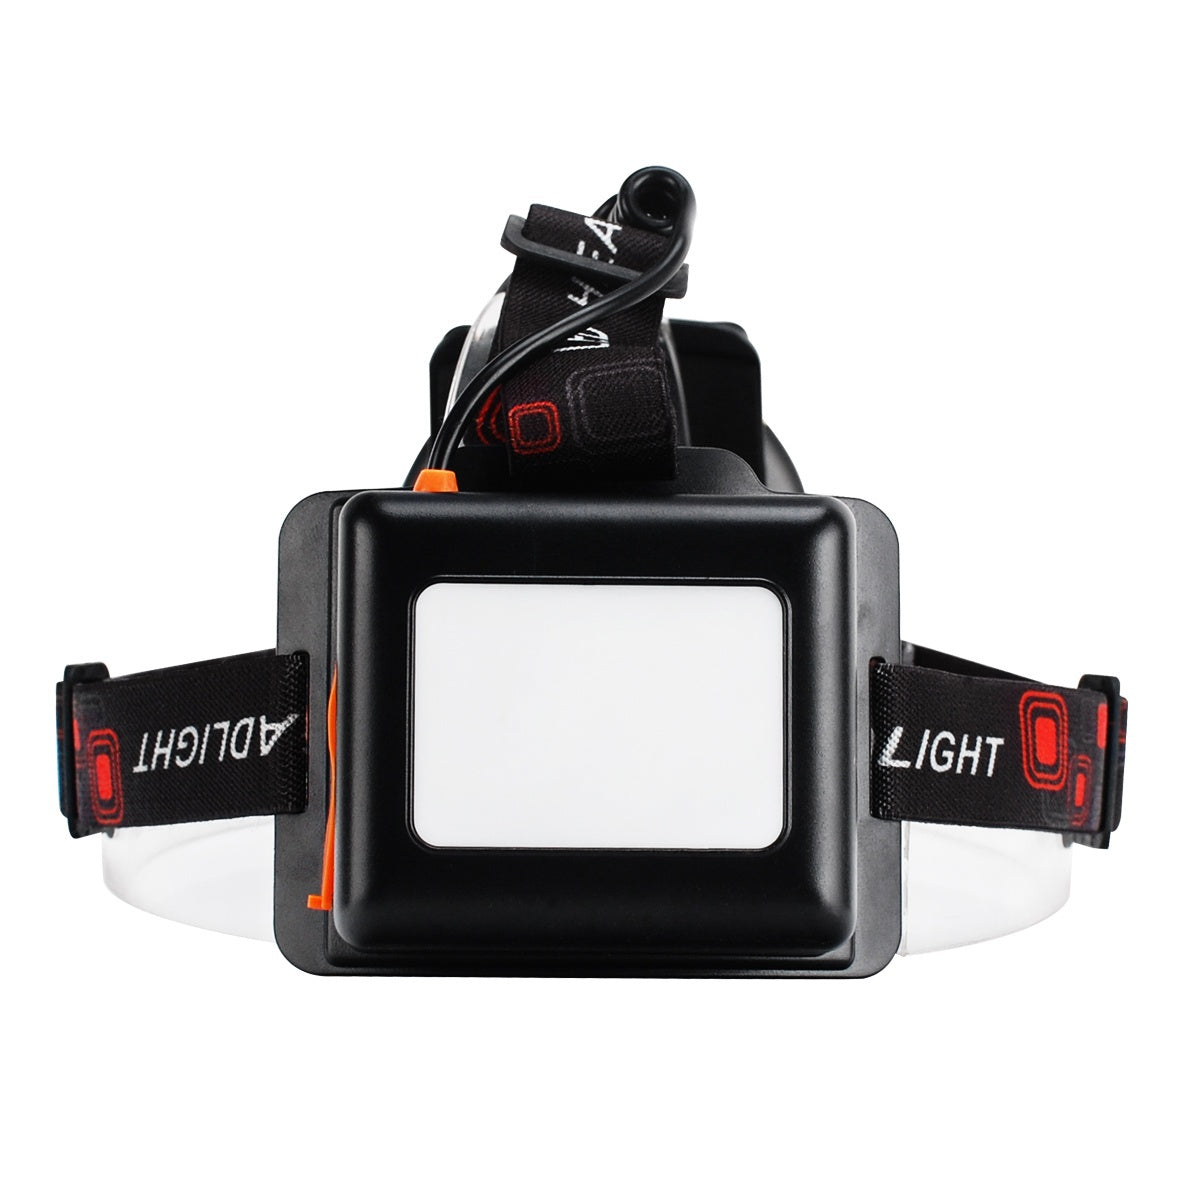 LED Headlamp Torch Outdoor Rechargeable Headlight For Camping Hunting Fishing